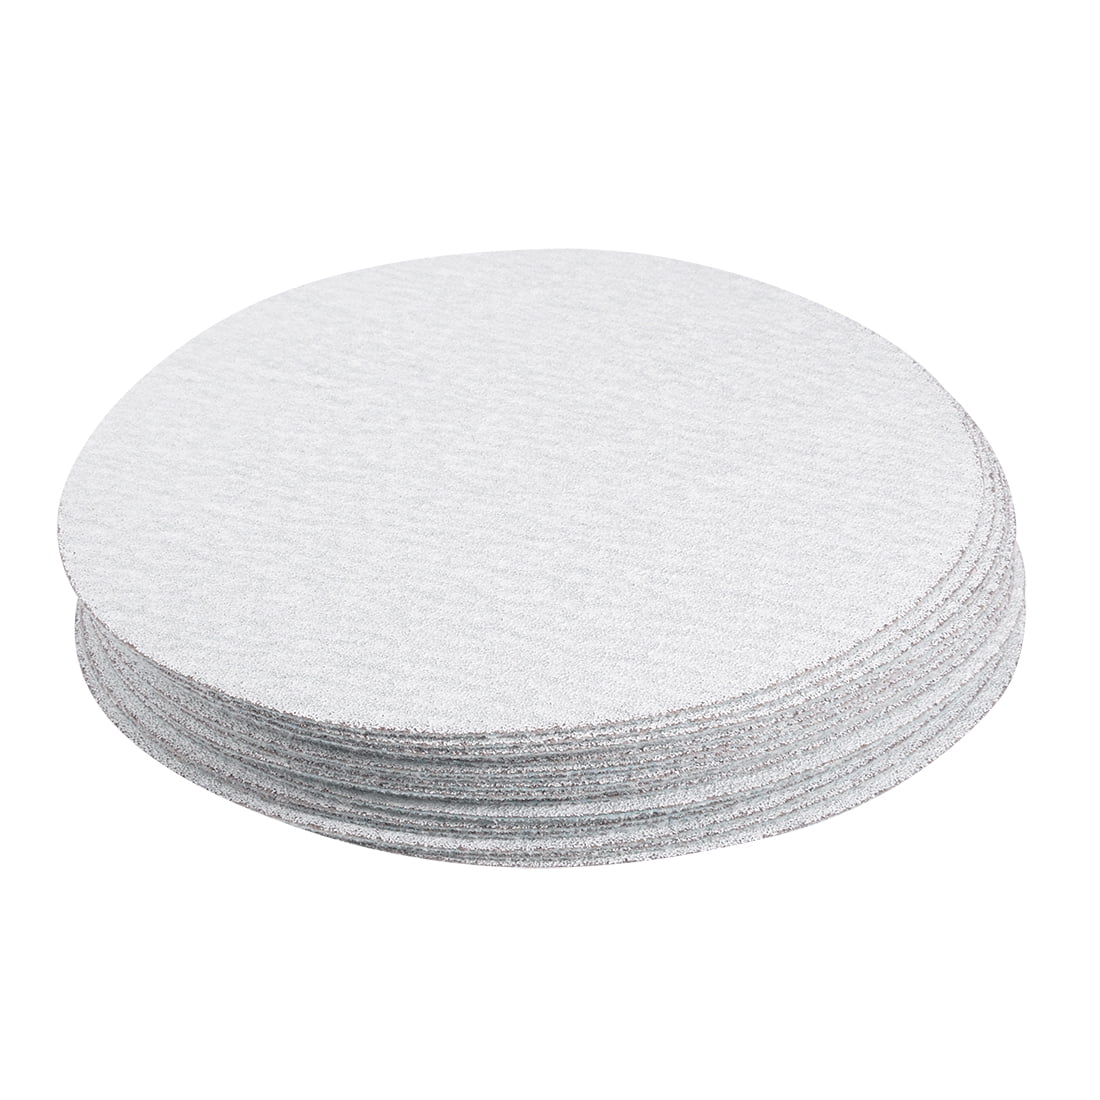 50 Pcs 6-Inch Aluminum Oxide White Dry Hook and Loop Sanding Discs 600 Grit 